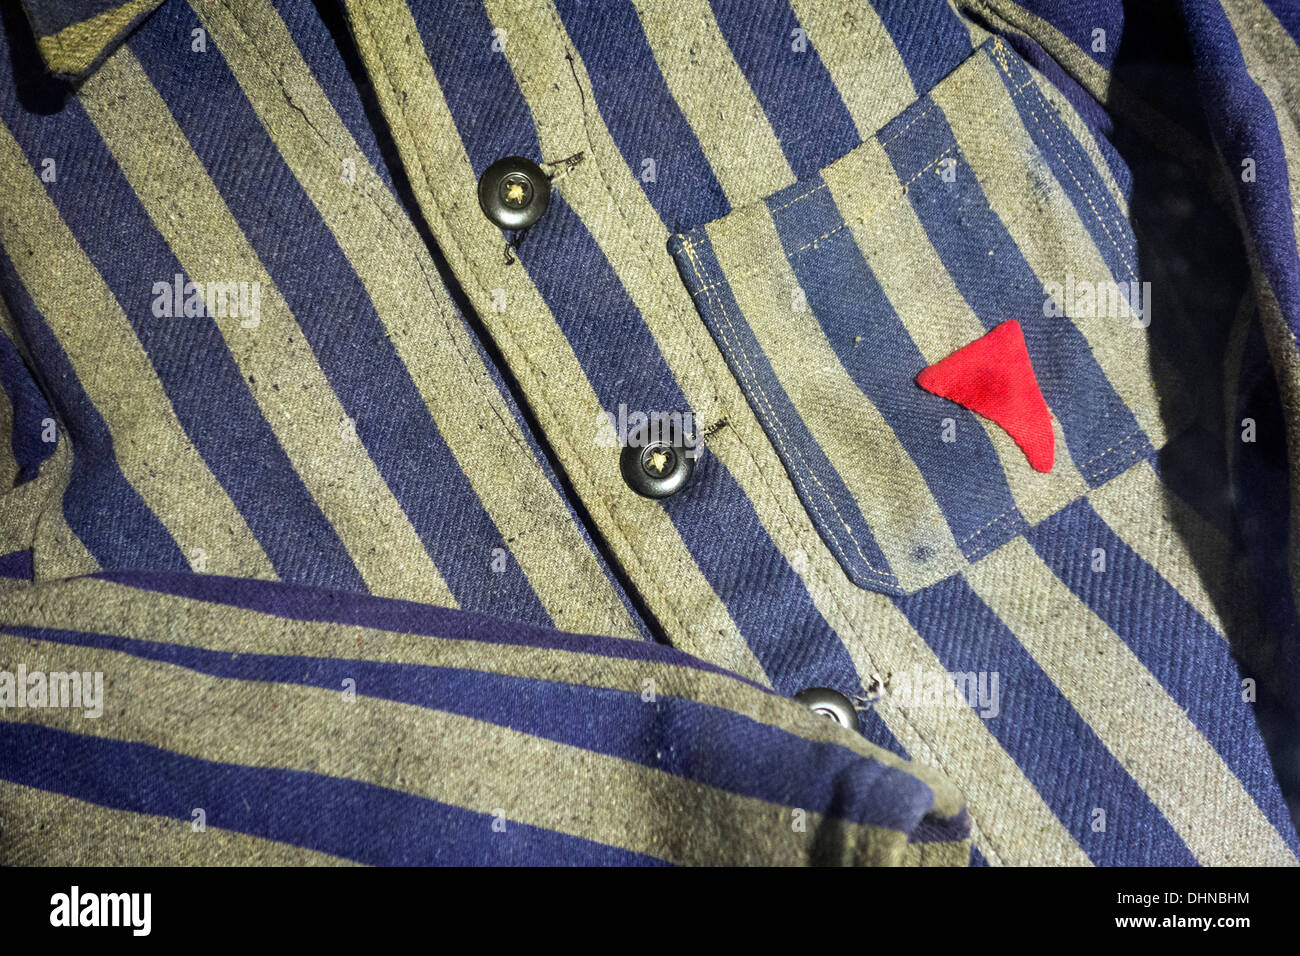 Close up of WW2 Auschwitz prisoner's clothes showing red triangular Nazi concentration camp badge of shame of political detainee Stock Photo